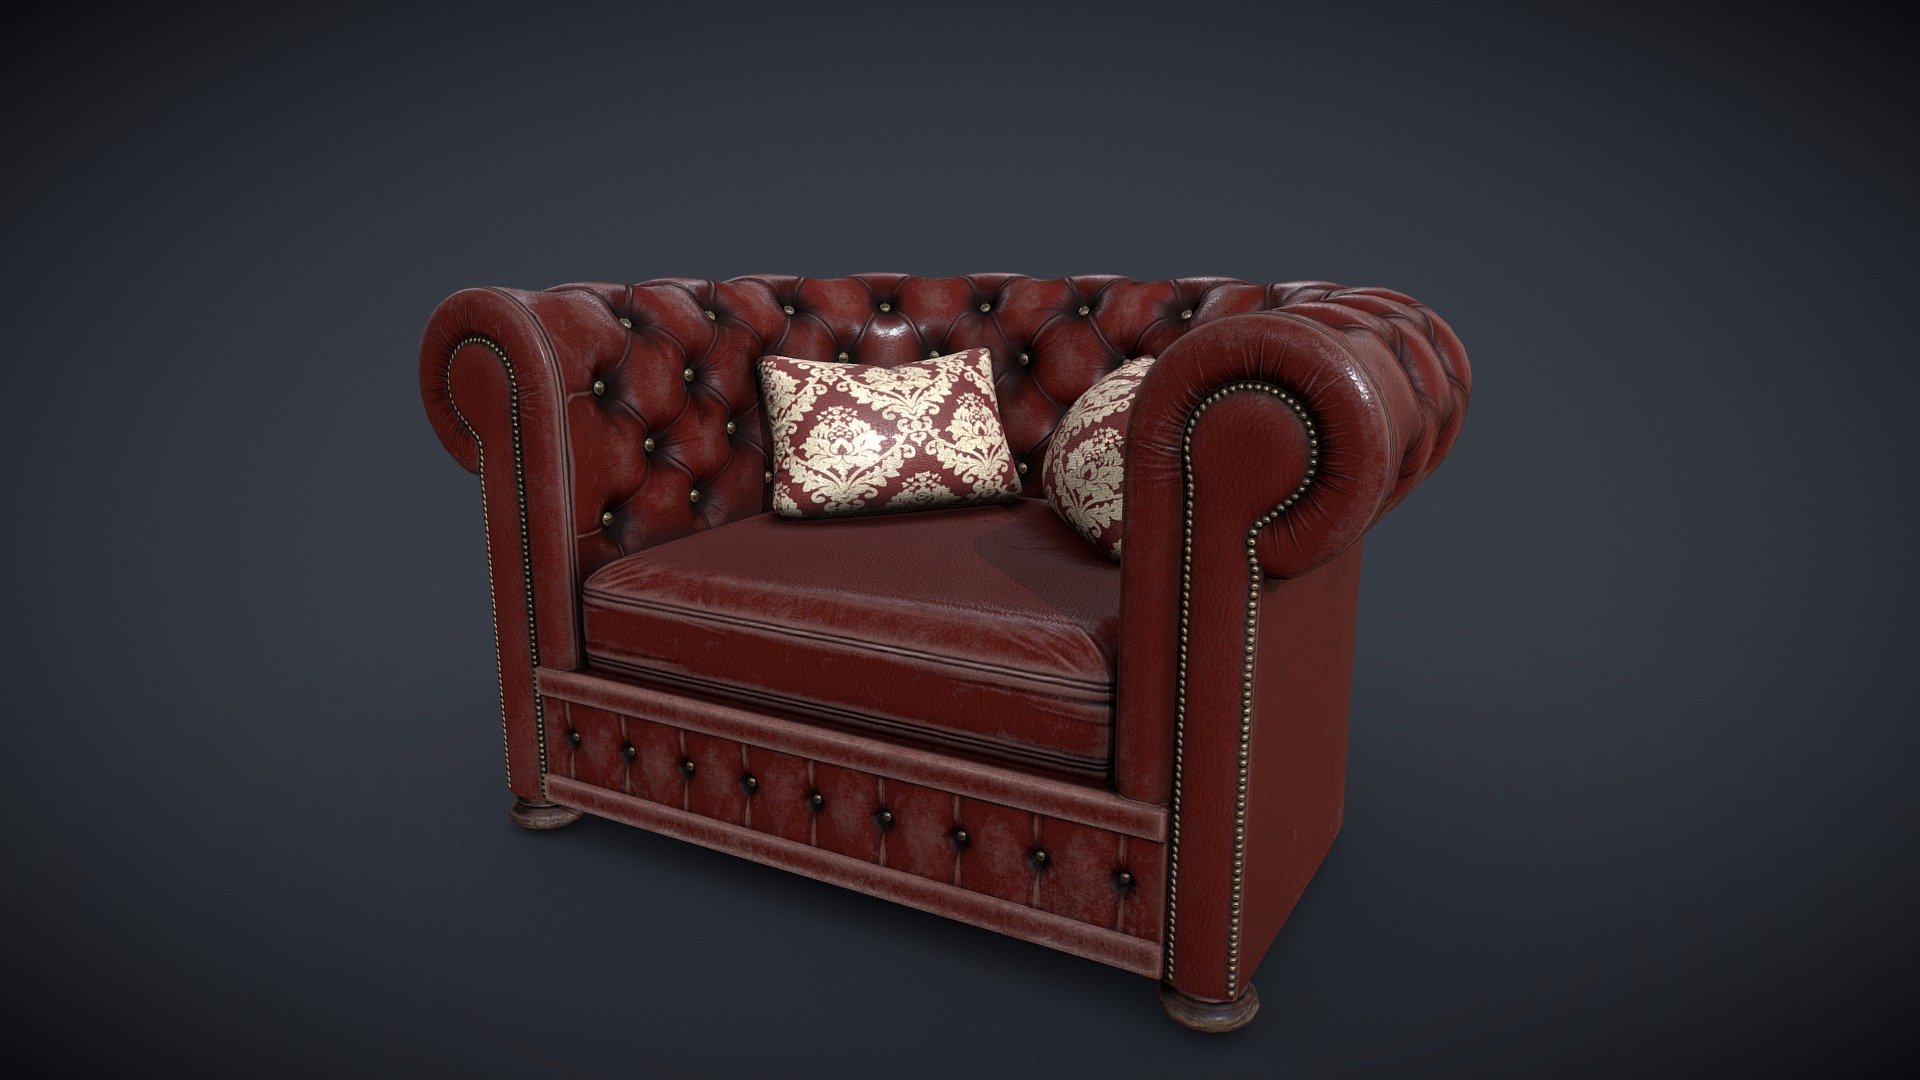 Hello all :) This is a small sofa made for a victorian project. Red padded leather material but still, confortable.

Made with Maya, PS and Substance.

You will find in the package Scene file, FBX and 2k Textures.
If you have any customs need, please feel free to contact me 3d model